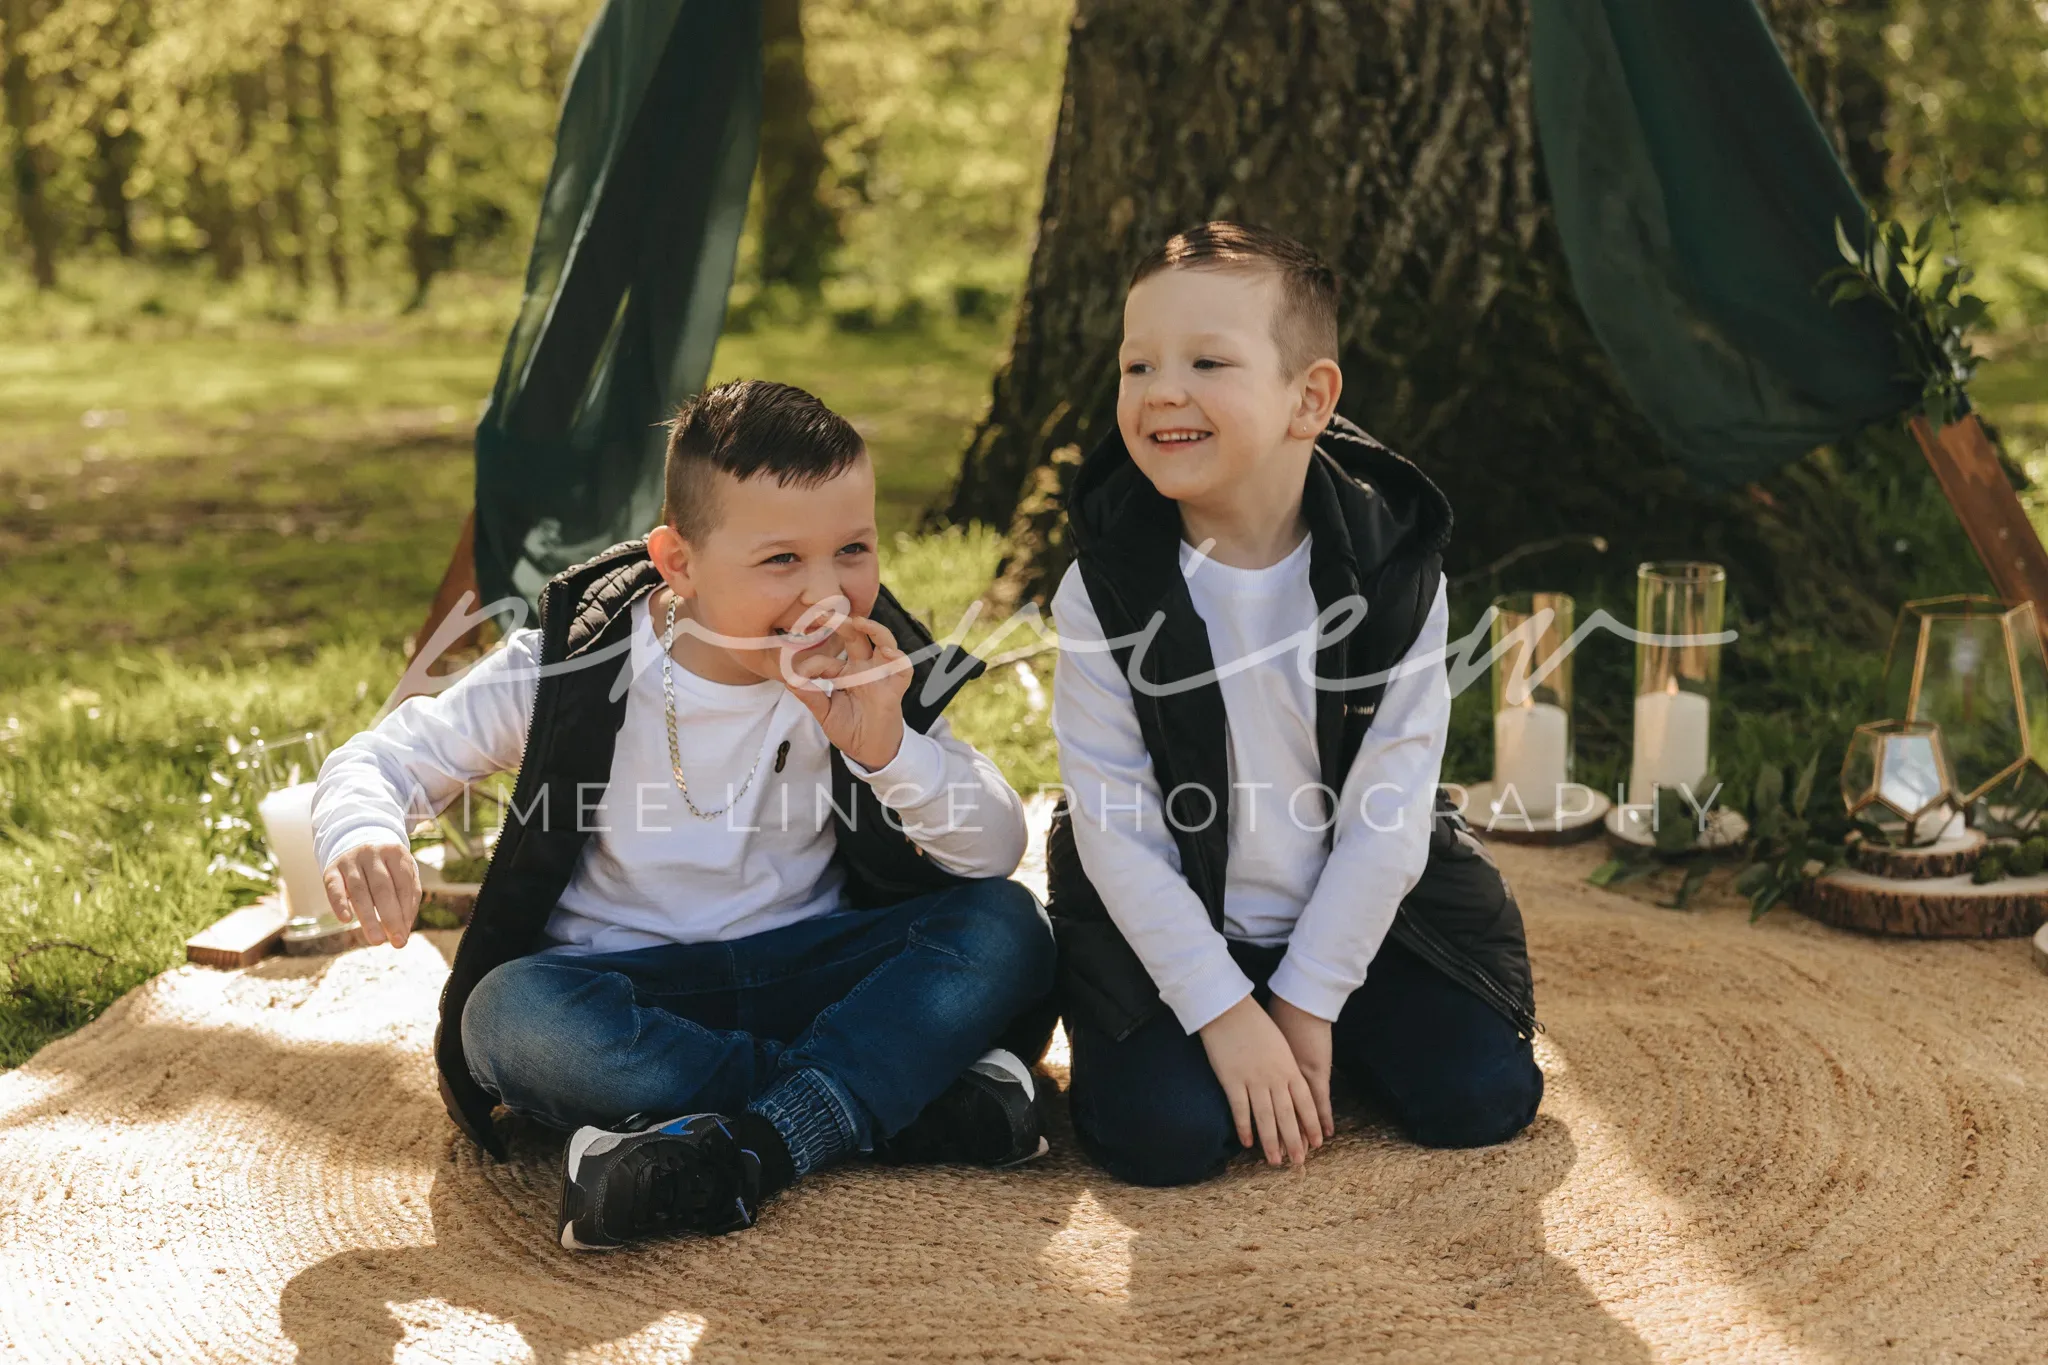 Two young boys sitting under an outdoor tent with a picnic setup, smiling and enjoying a sunny day. one boy eats a marshmallow. they wear white shirts, vests, and jeans in a grassy park.